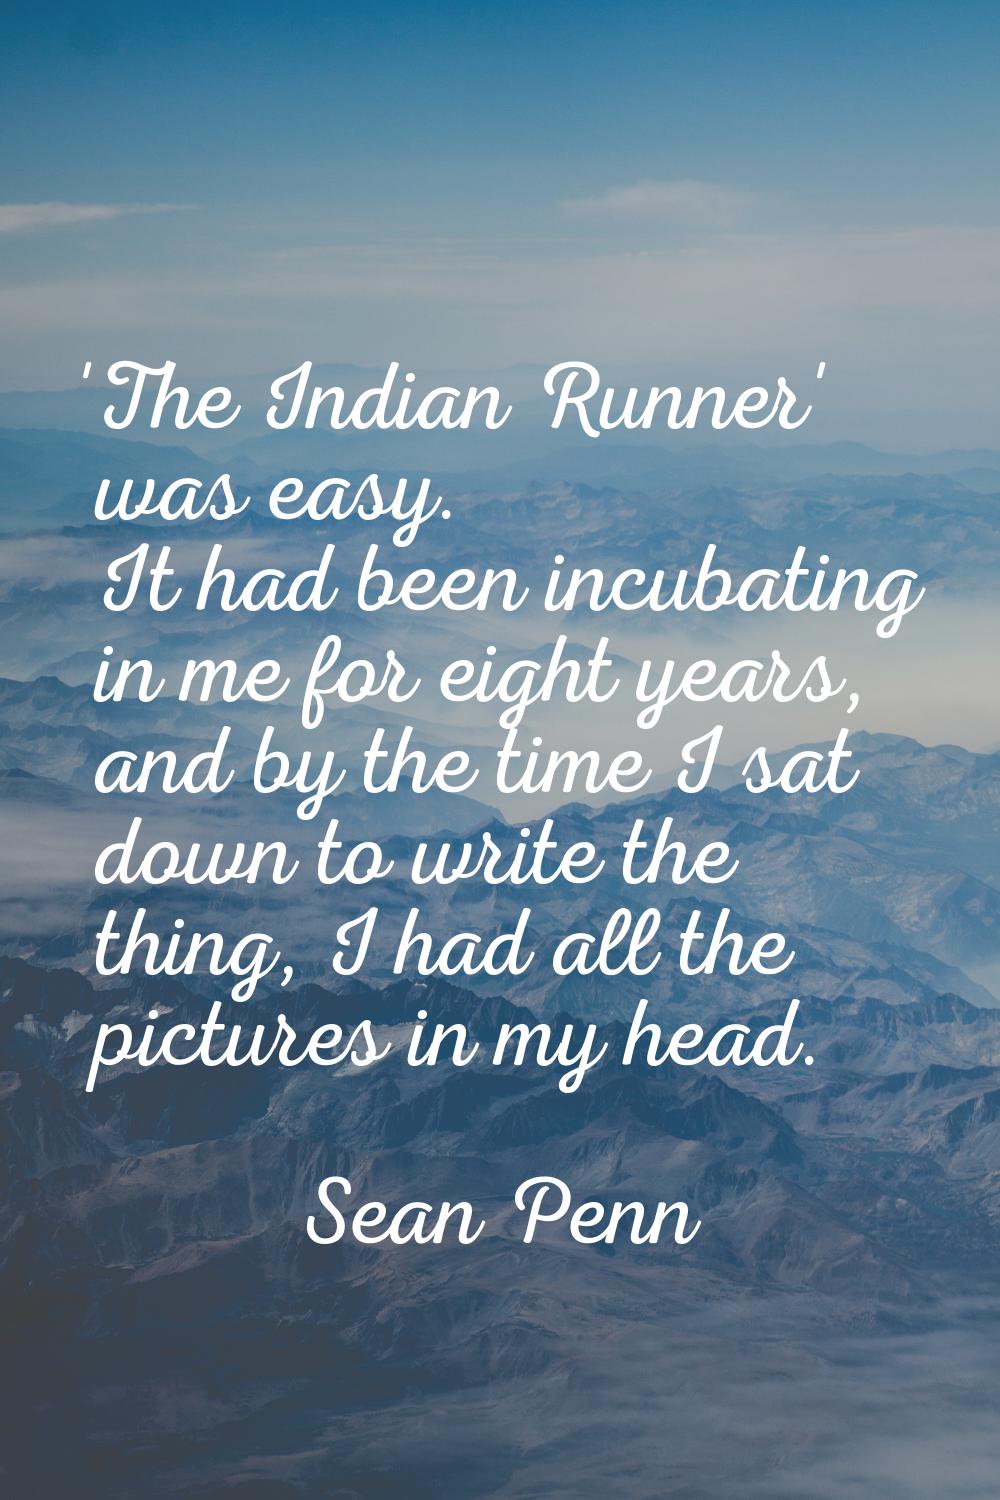 'The Indian Runner' was easy. It had been incubating in me for eight years, and by the time I sat d